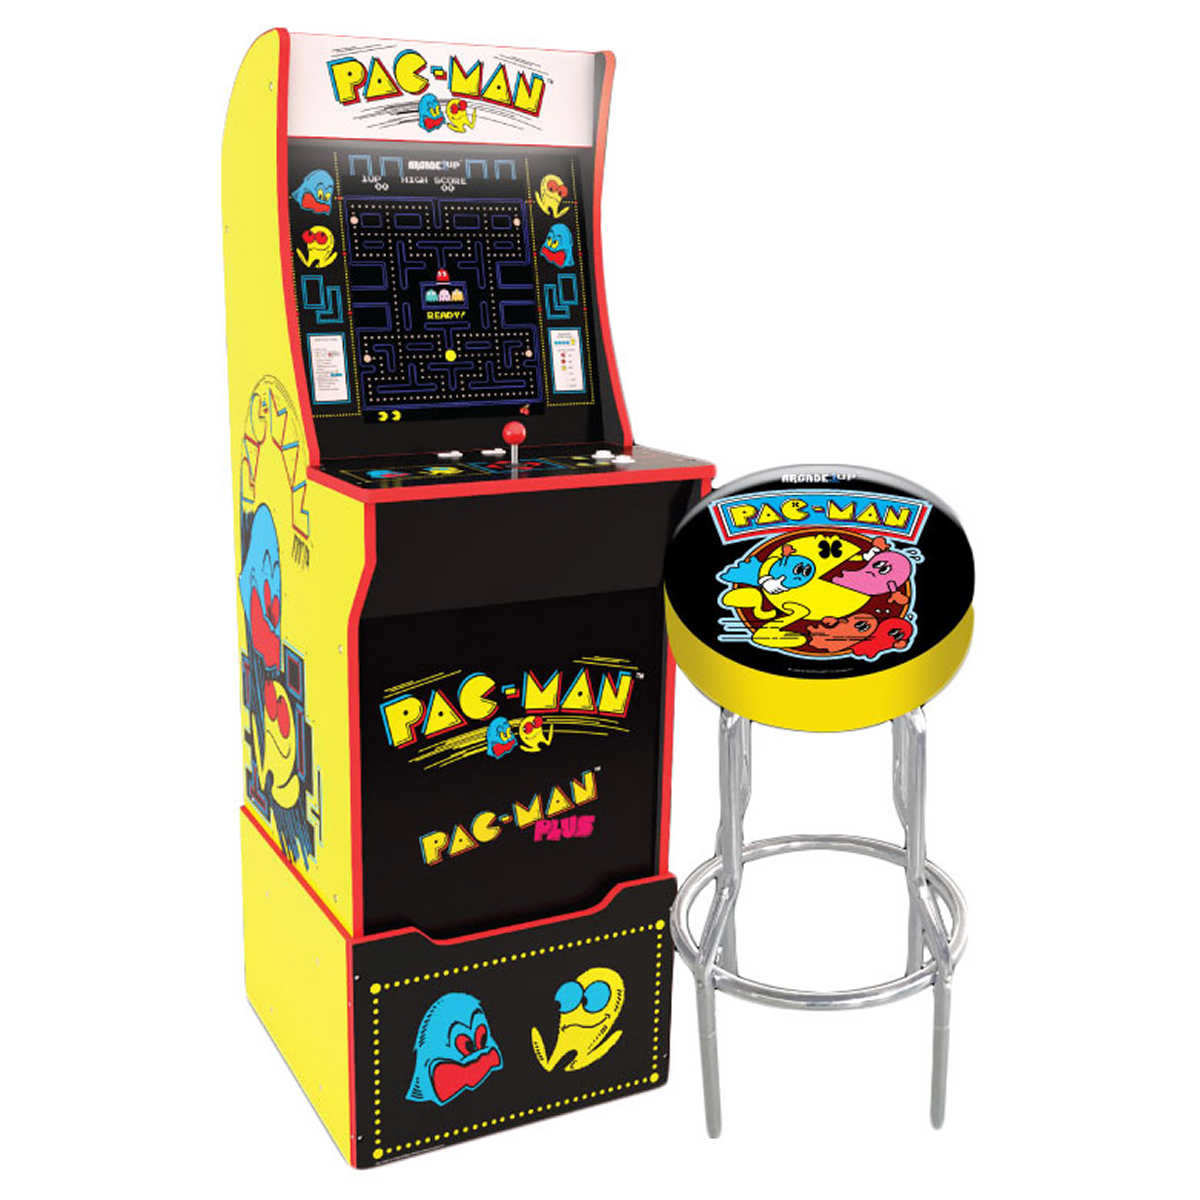 Arcade1up Mini Pac Man Arcade Cabinet With Riser Stool And